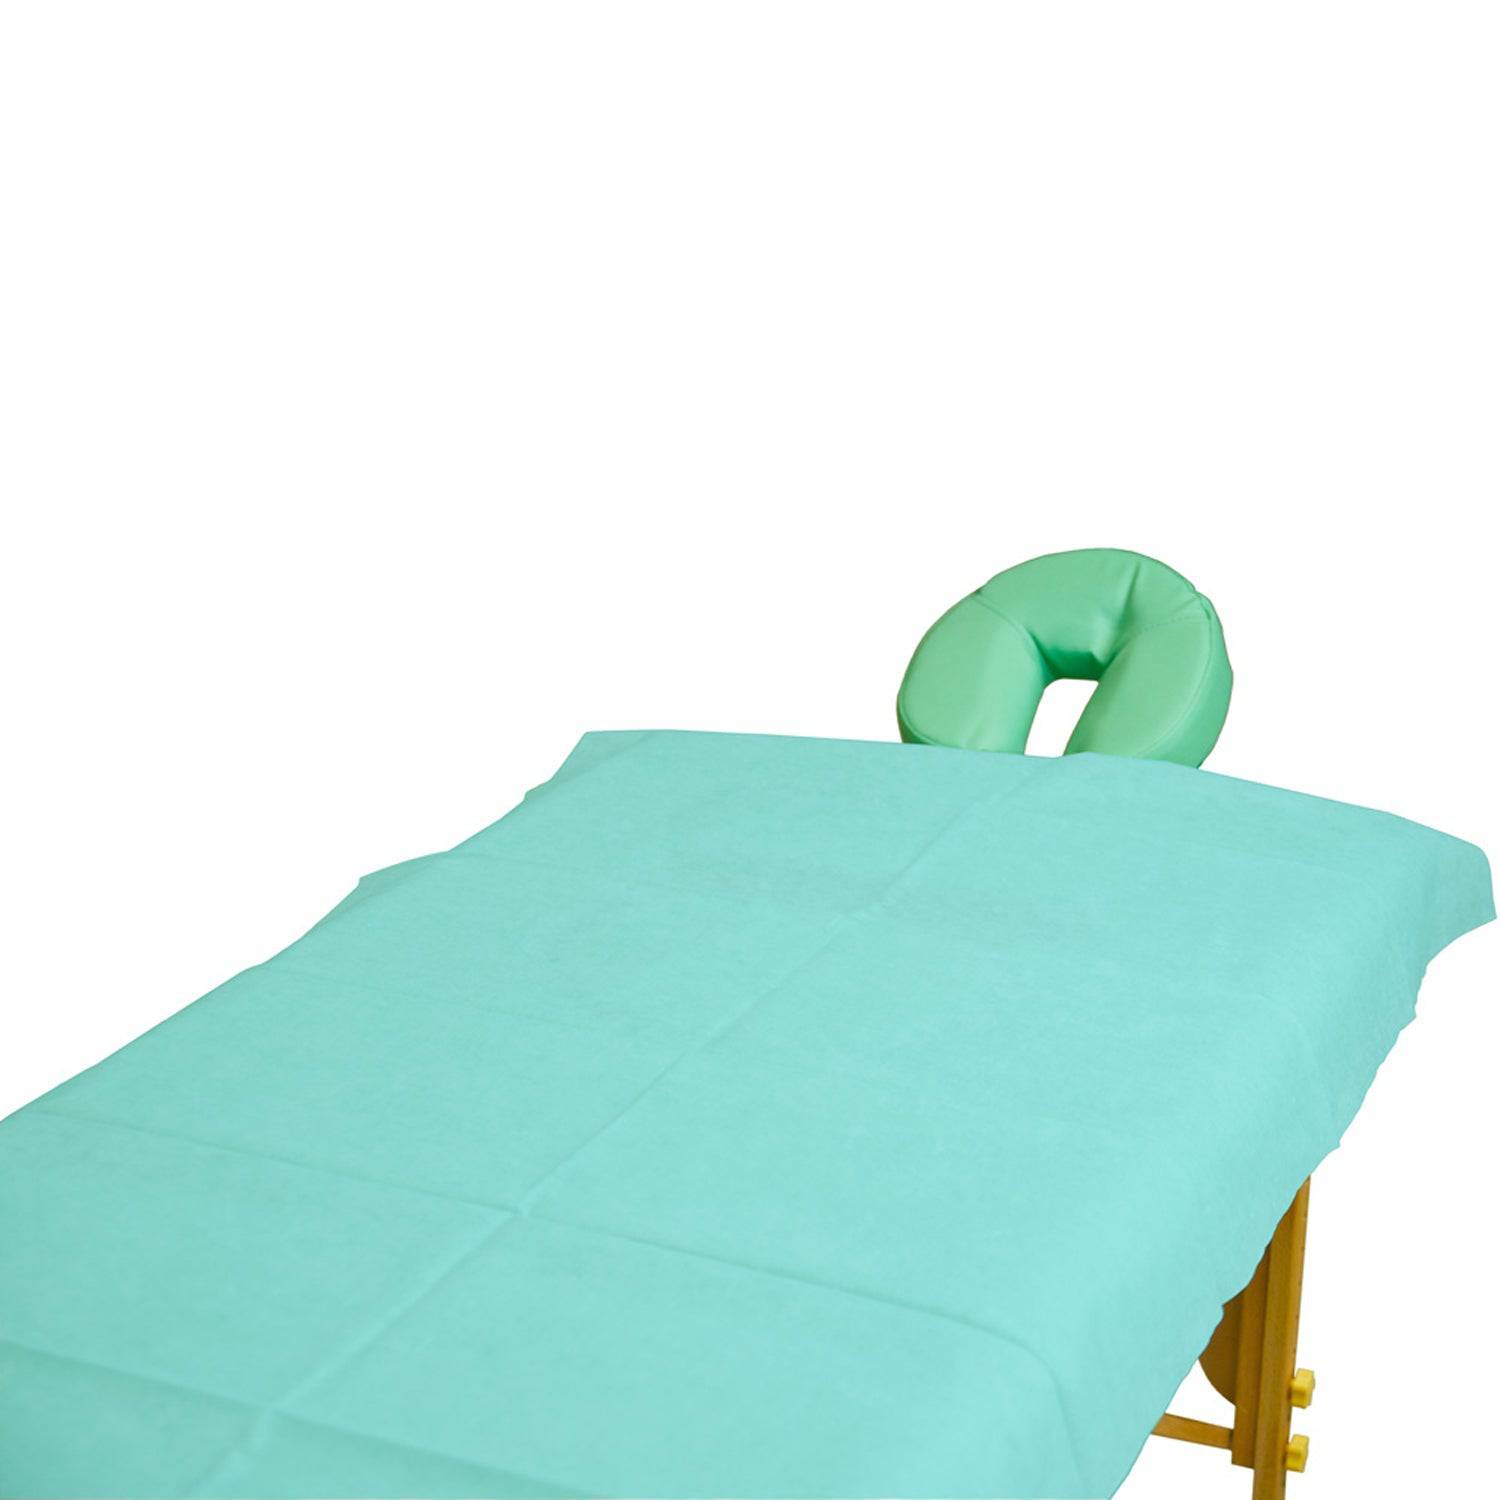 Disposable Sheets for Exam Tables - Mint Green (100)